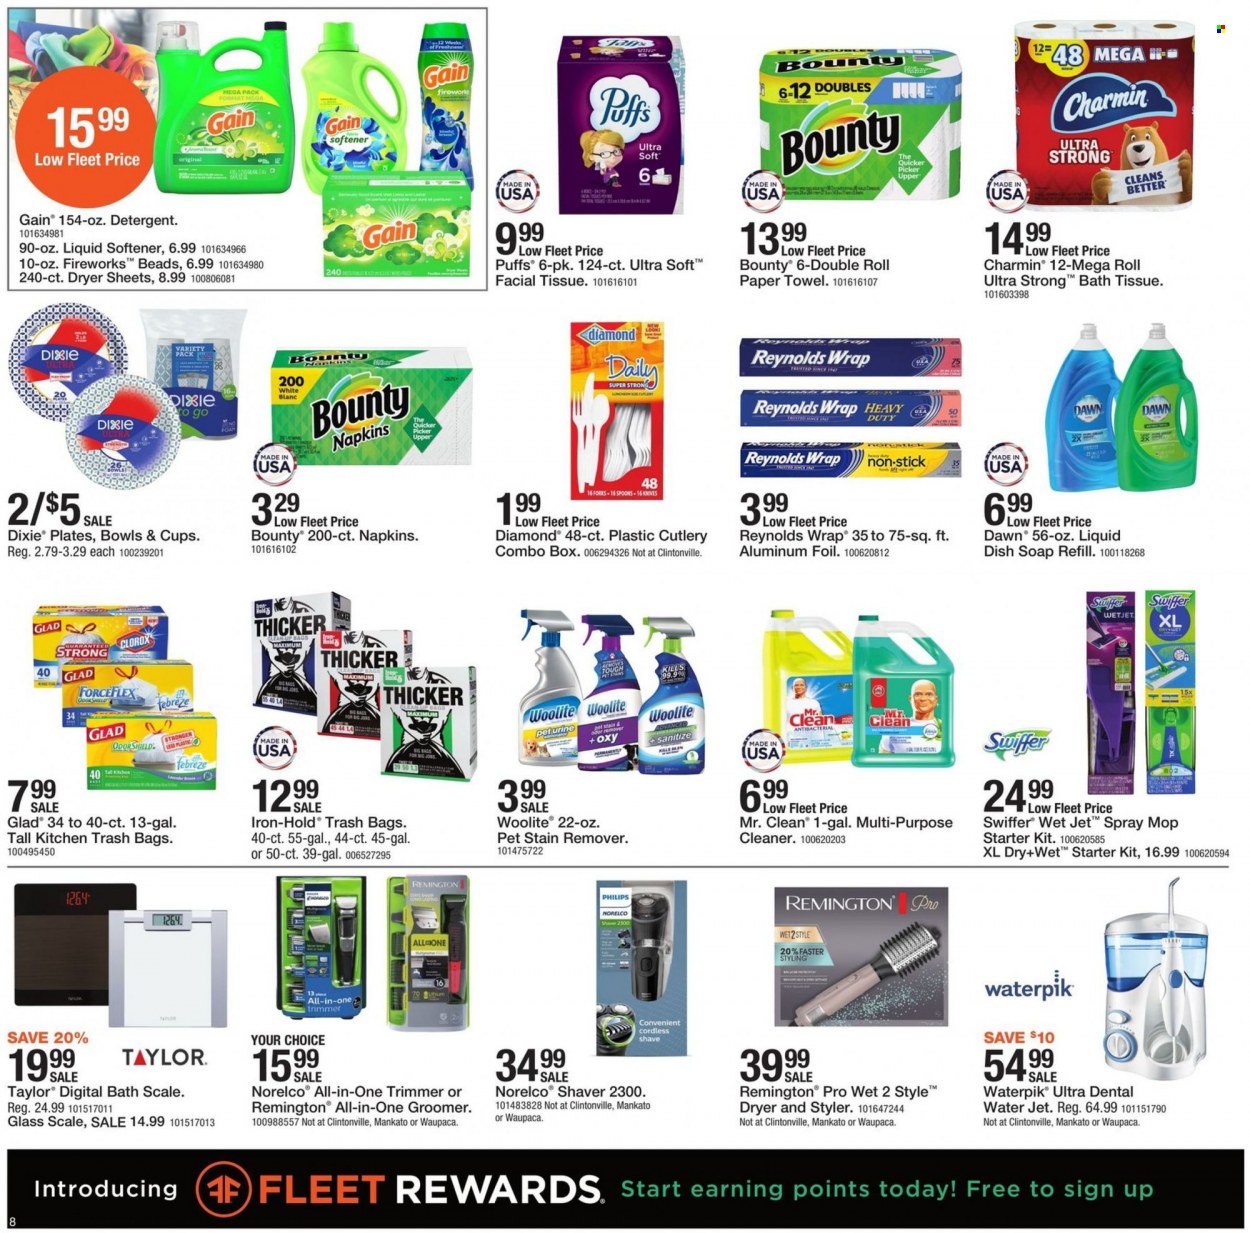 thumbnail - Fleet Farm Flyer - 12/31/2021 - 01/08/2022 - Sales products - LG, puffs, Bounty, napkins, bath tissue, paper towels, Charmin, detergent, Febreze, Gain, cleaner, stain remover, Clorox, Woolite, Swiffer, fabric softener, dryer sheets, Jet, soap, dental water, shaver, trash bags, trimmer, knife, mop, WetJet, Dixie, spoon, plate, cup, disposable cutlery, scale, aluminium foil, Philips, Remington. Page 8.